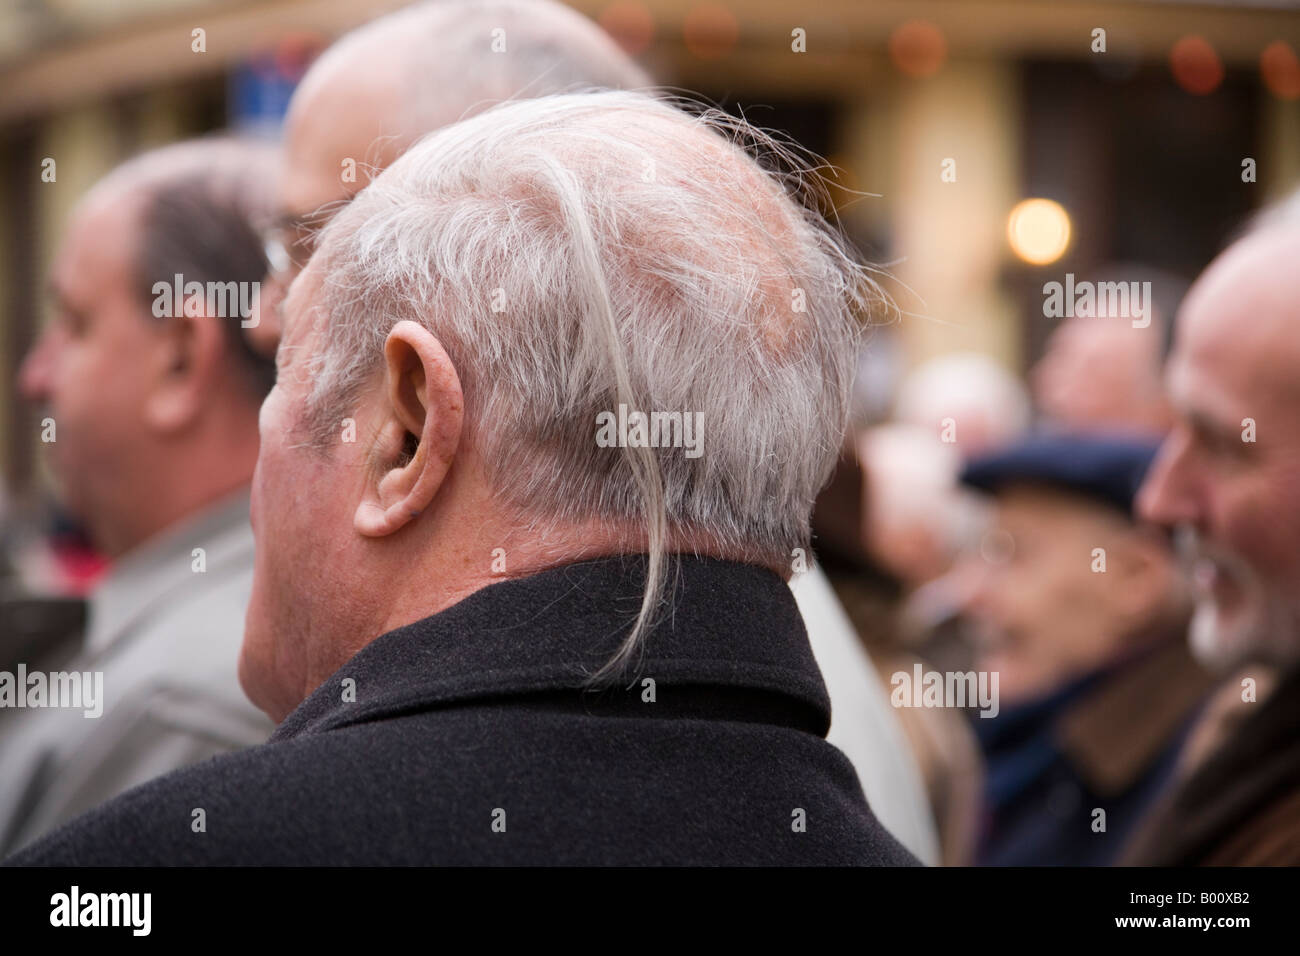 Belgian man with a comb-over hair cut. Stock Photo